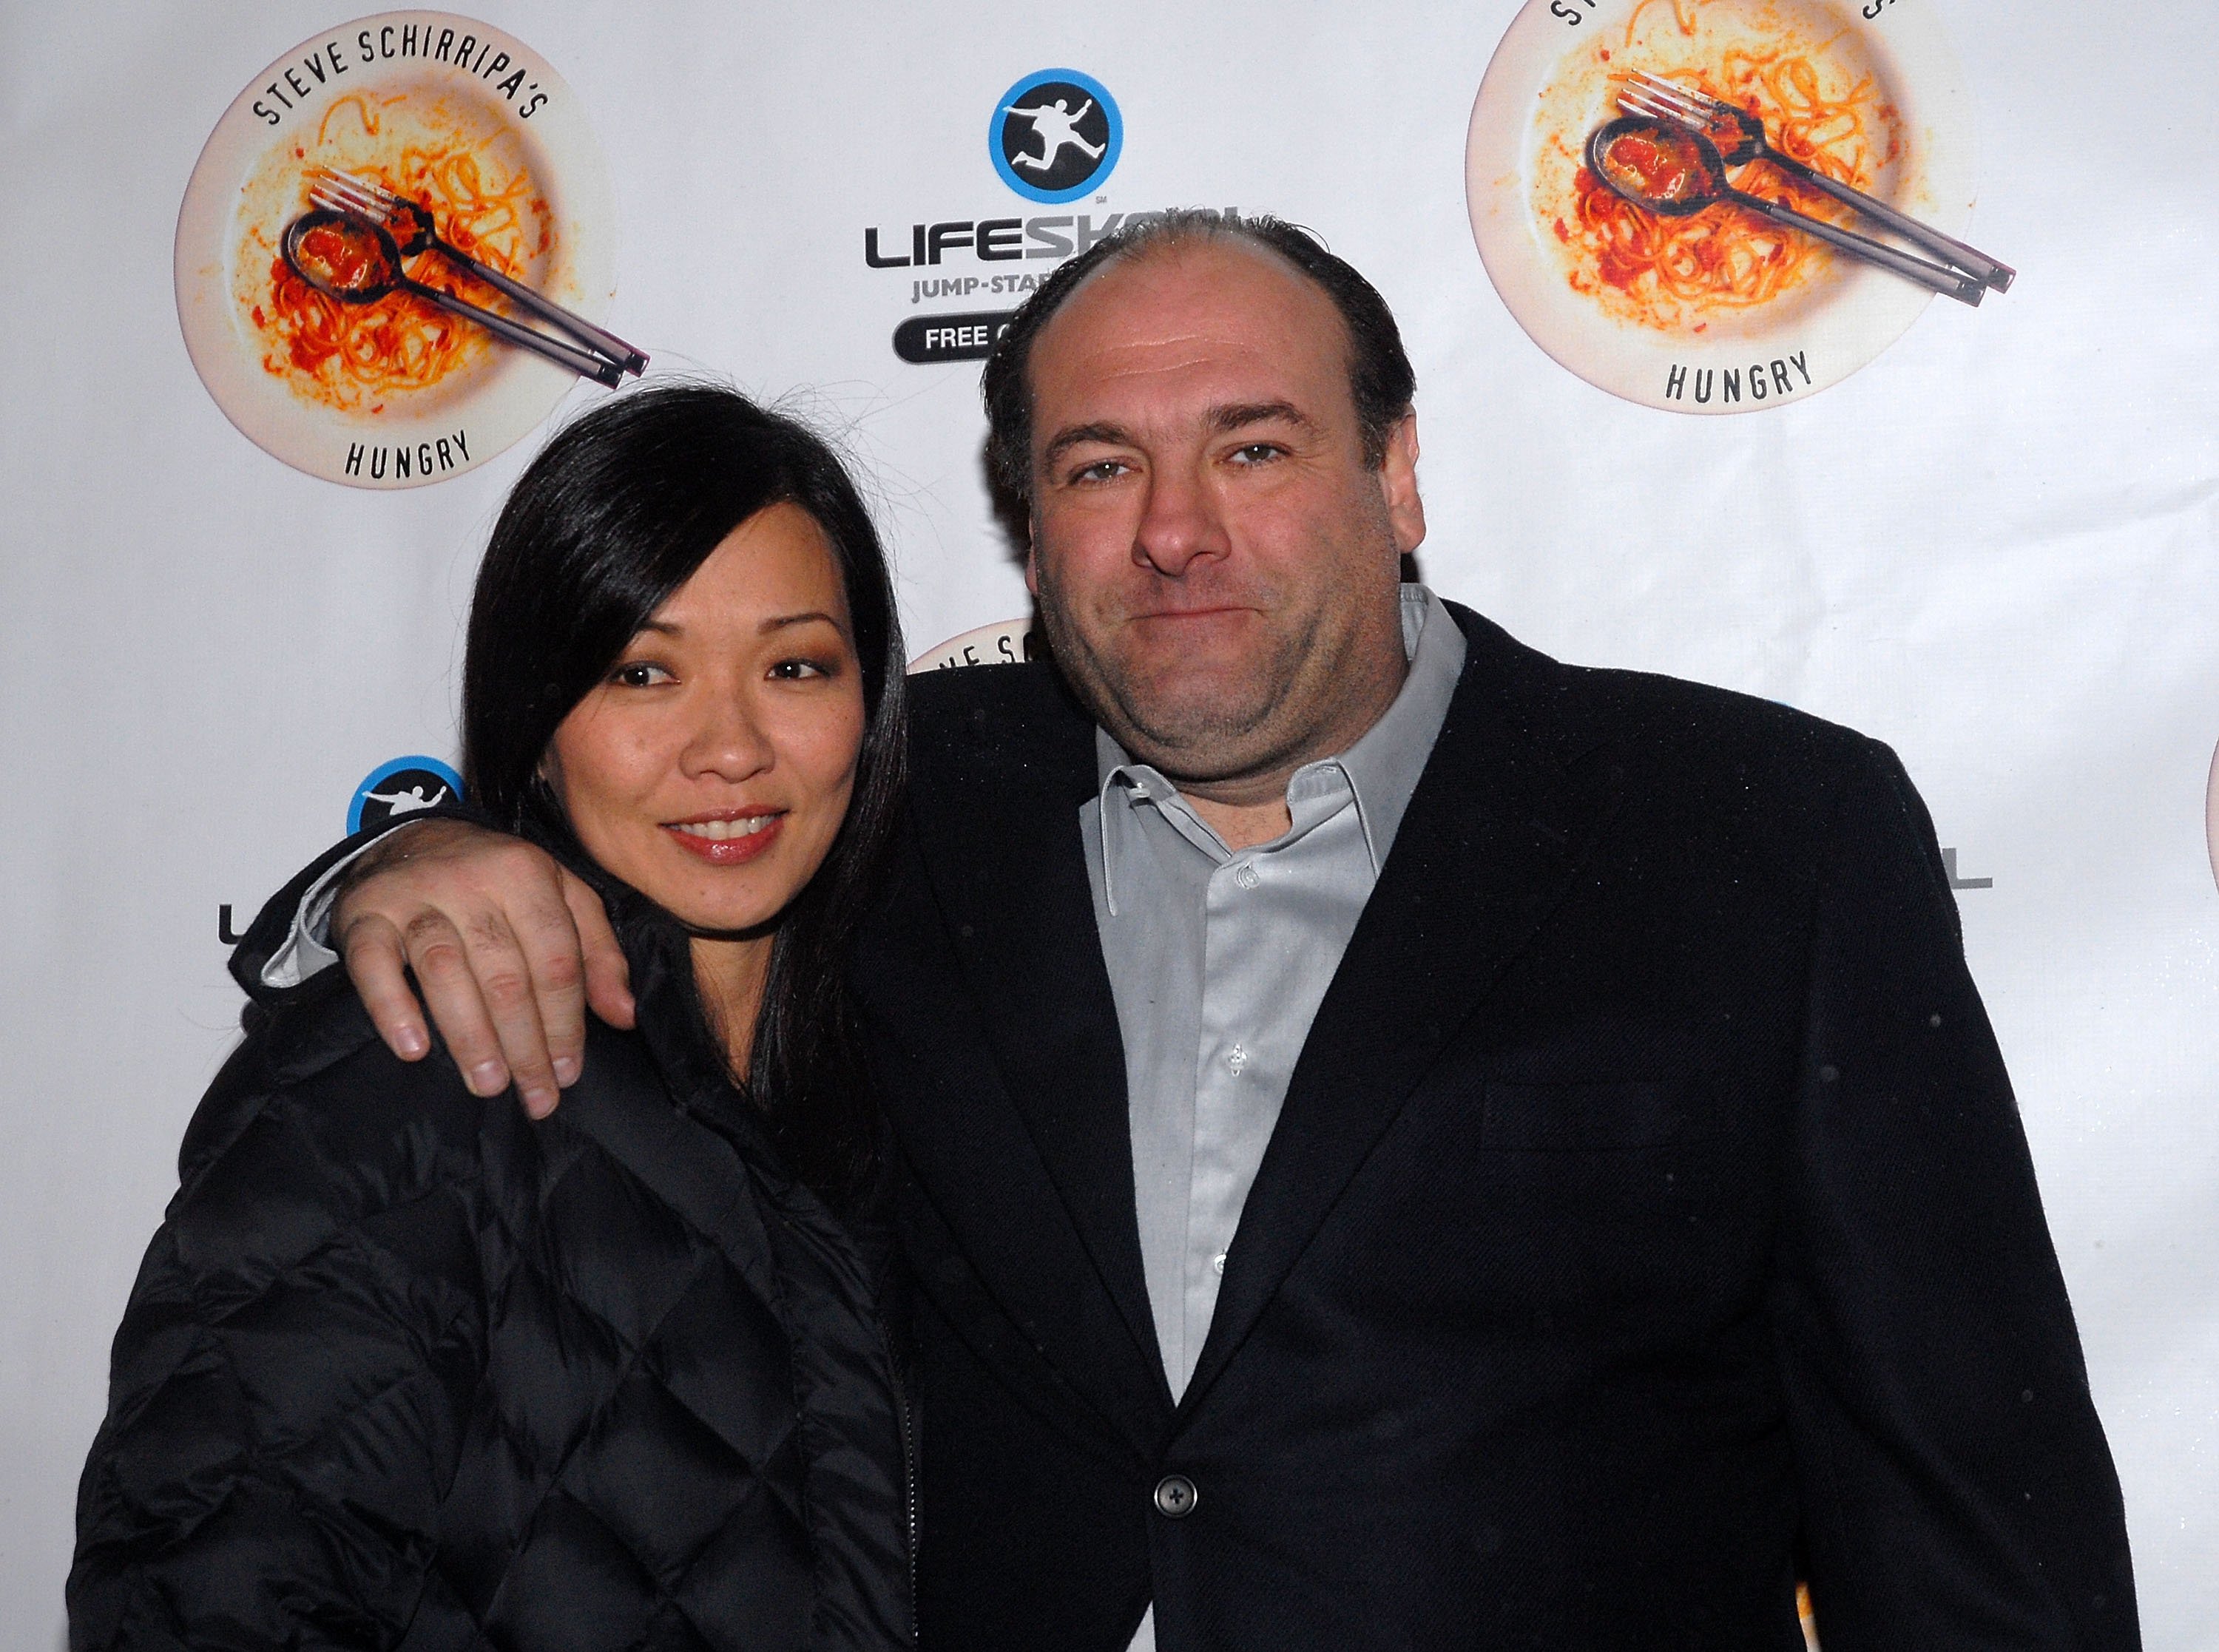 Deborah Lin and James Gandolfini attend the Worlds's Largest Cannoli Christmas Tree hosted by "Steve Schirripa's Hungrey" on Lifeskool, IL Cortile Restaurant on December 5,2007, in New York City. | Source: Getty Images